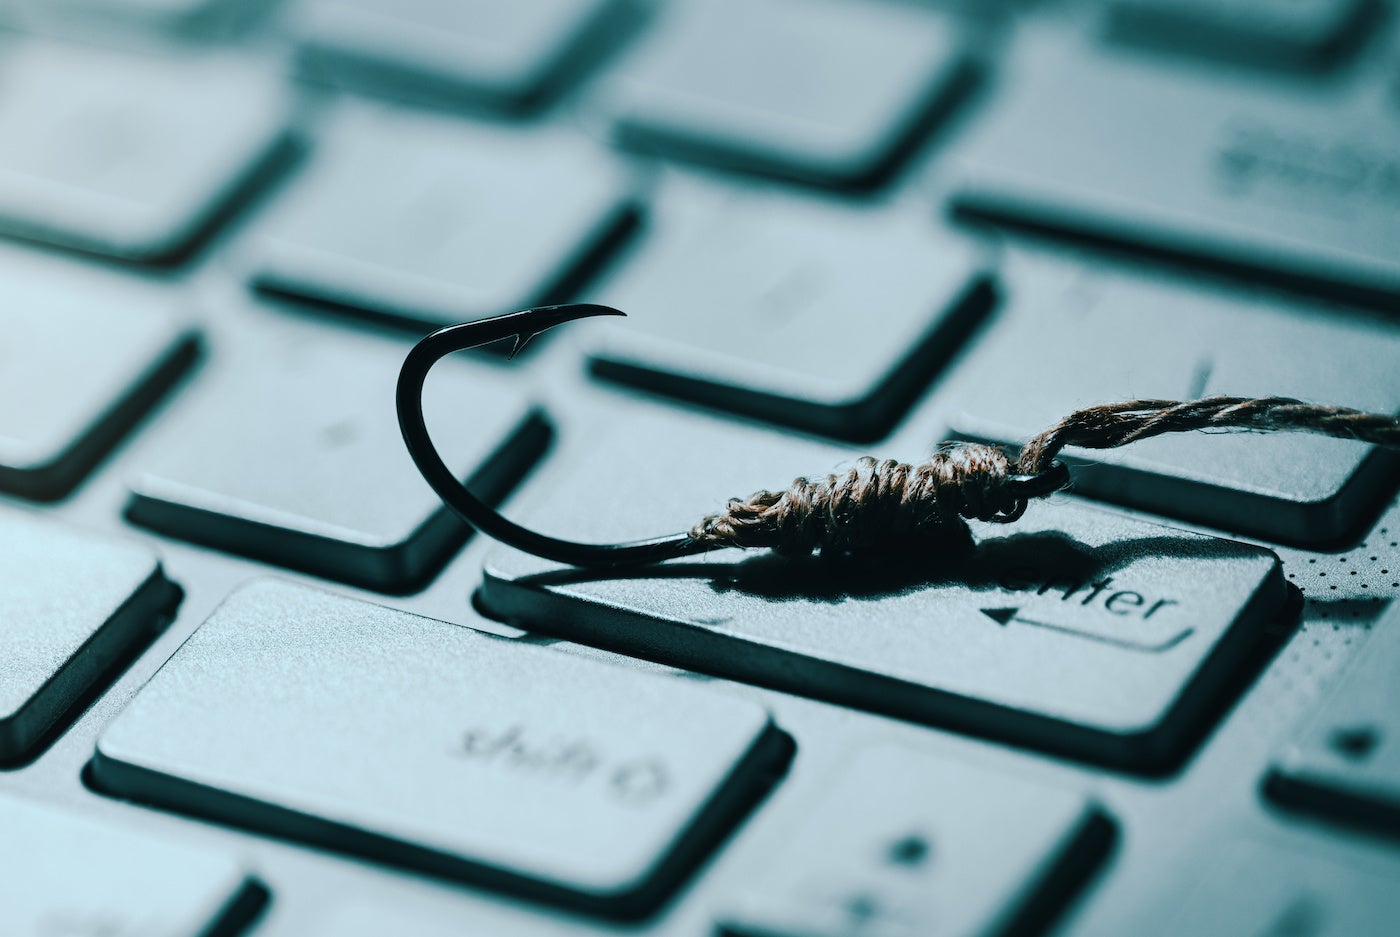 Spear Phishing vs Phishing: What Are The Main Differences? – Source: www.techrepublic.com